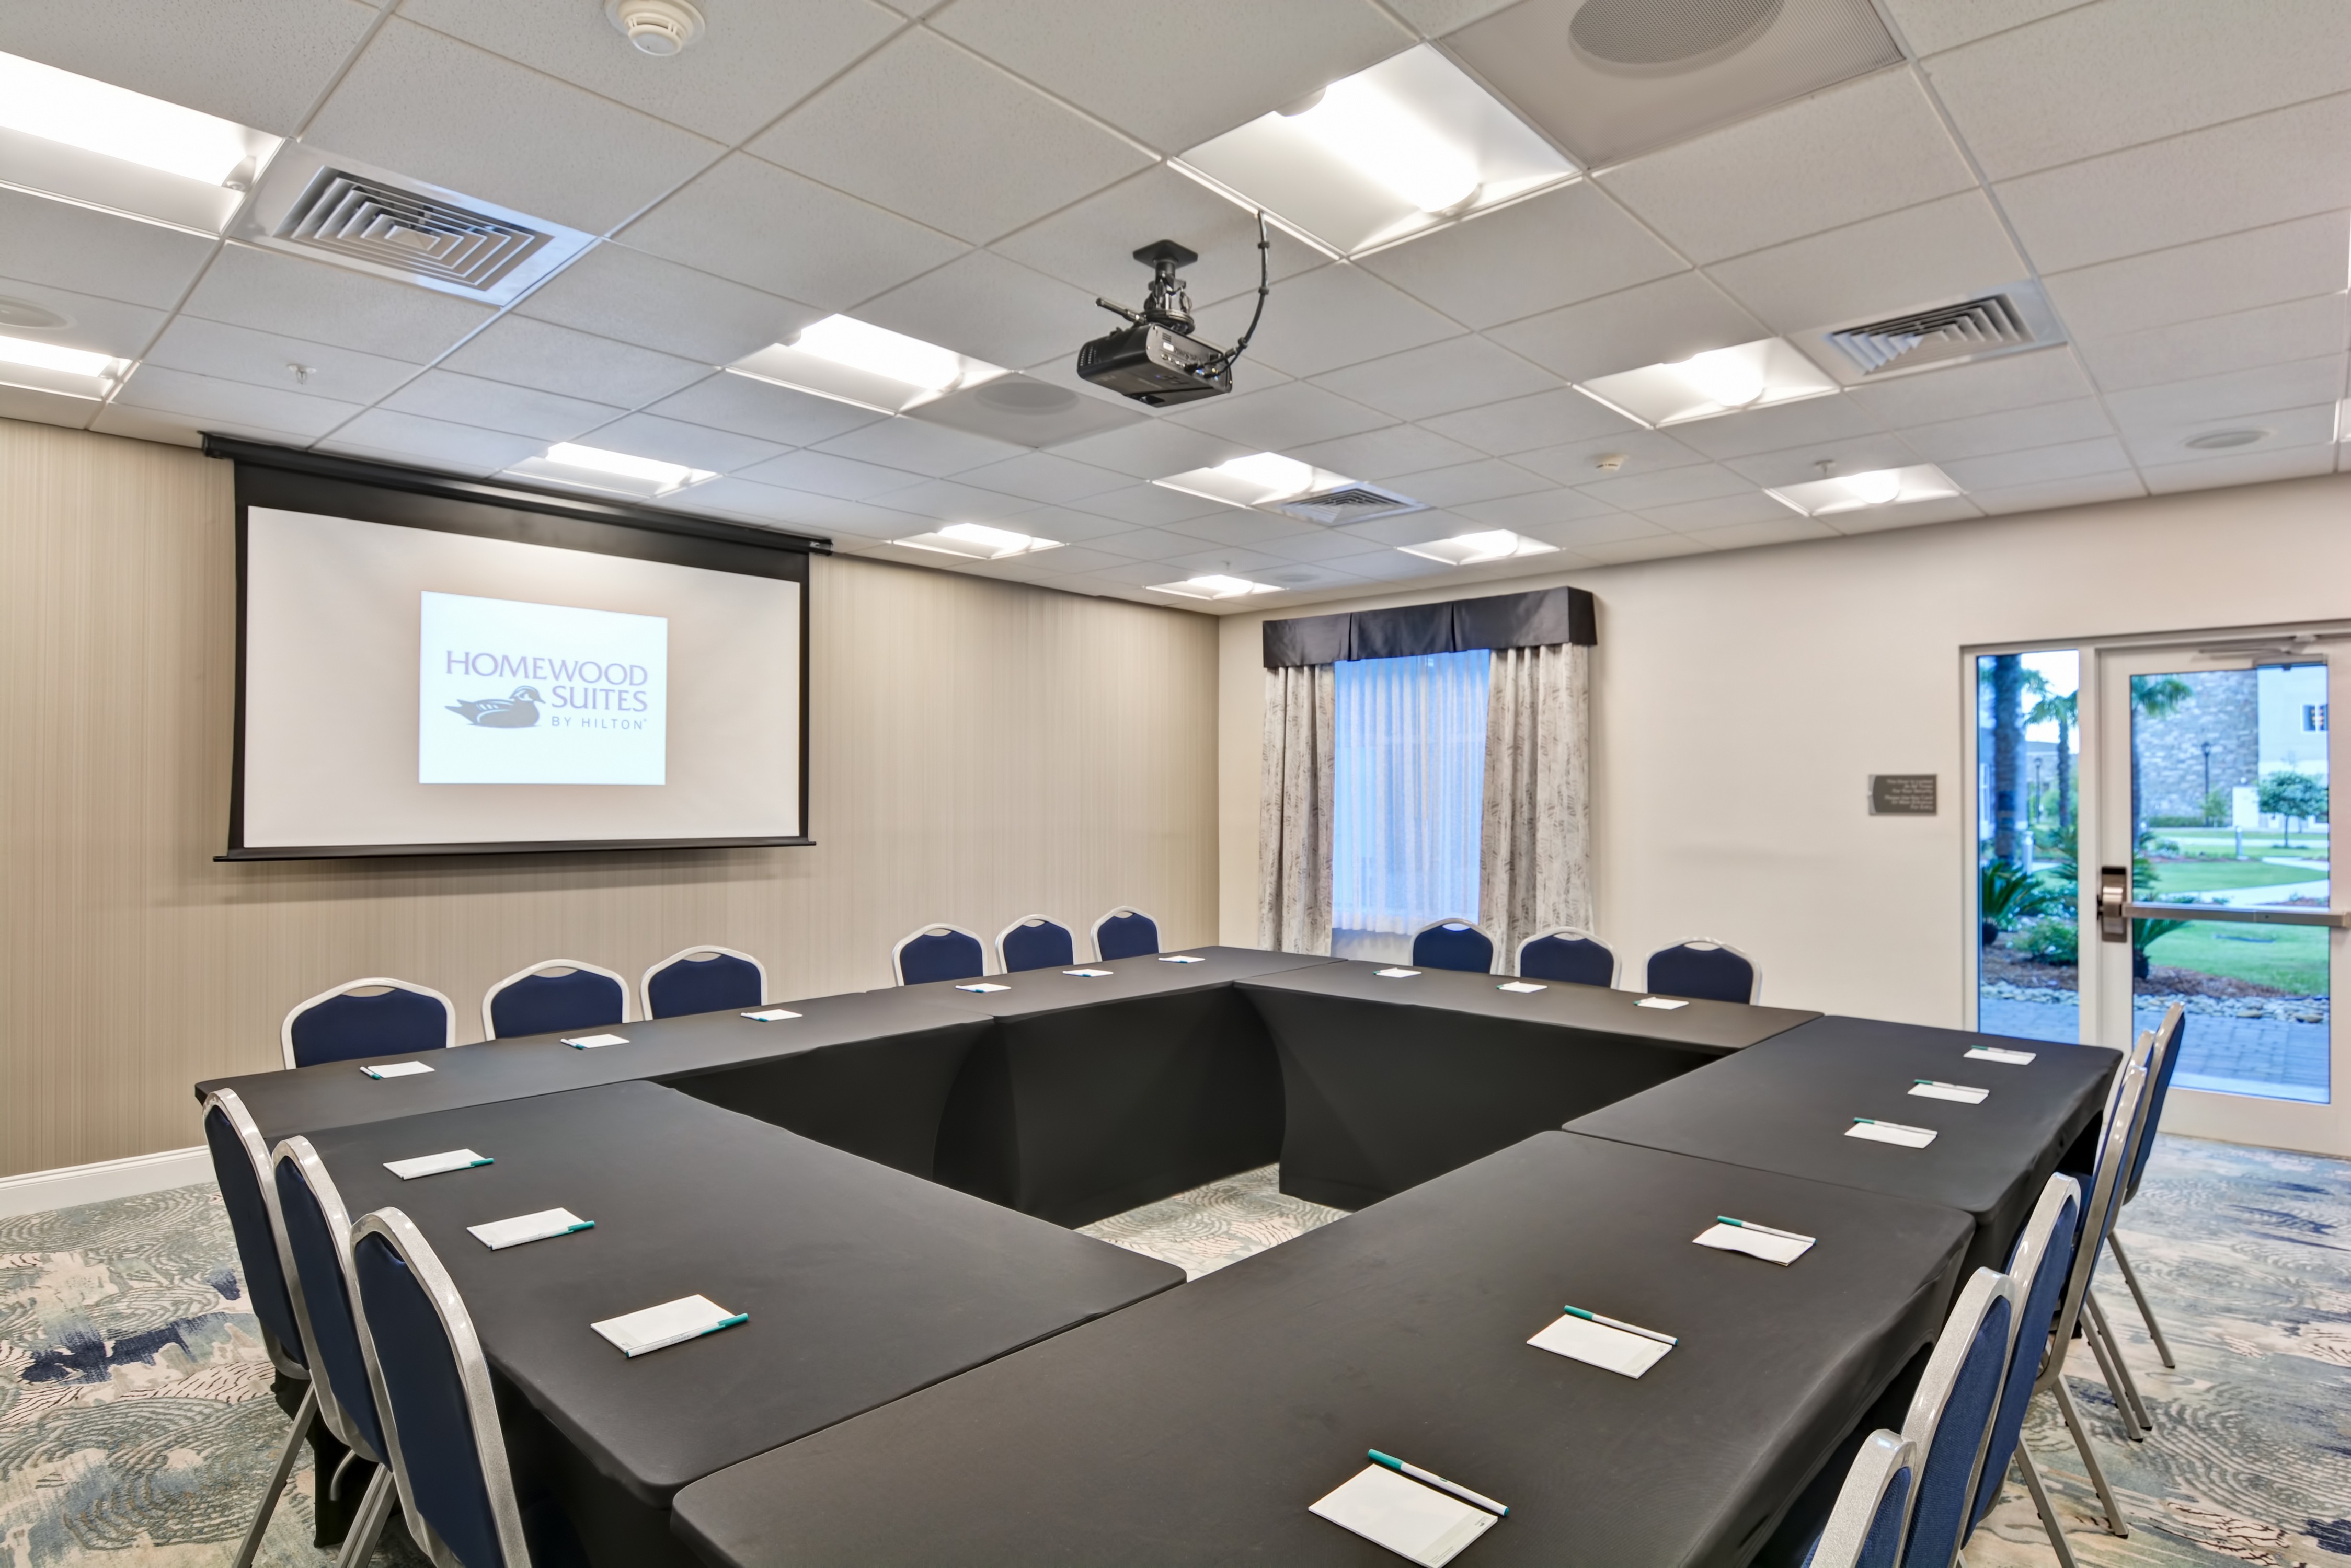 Meeting Room Boardroom Setup With Hollow Square Table